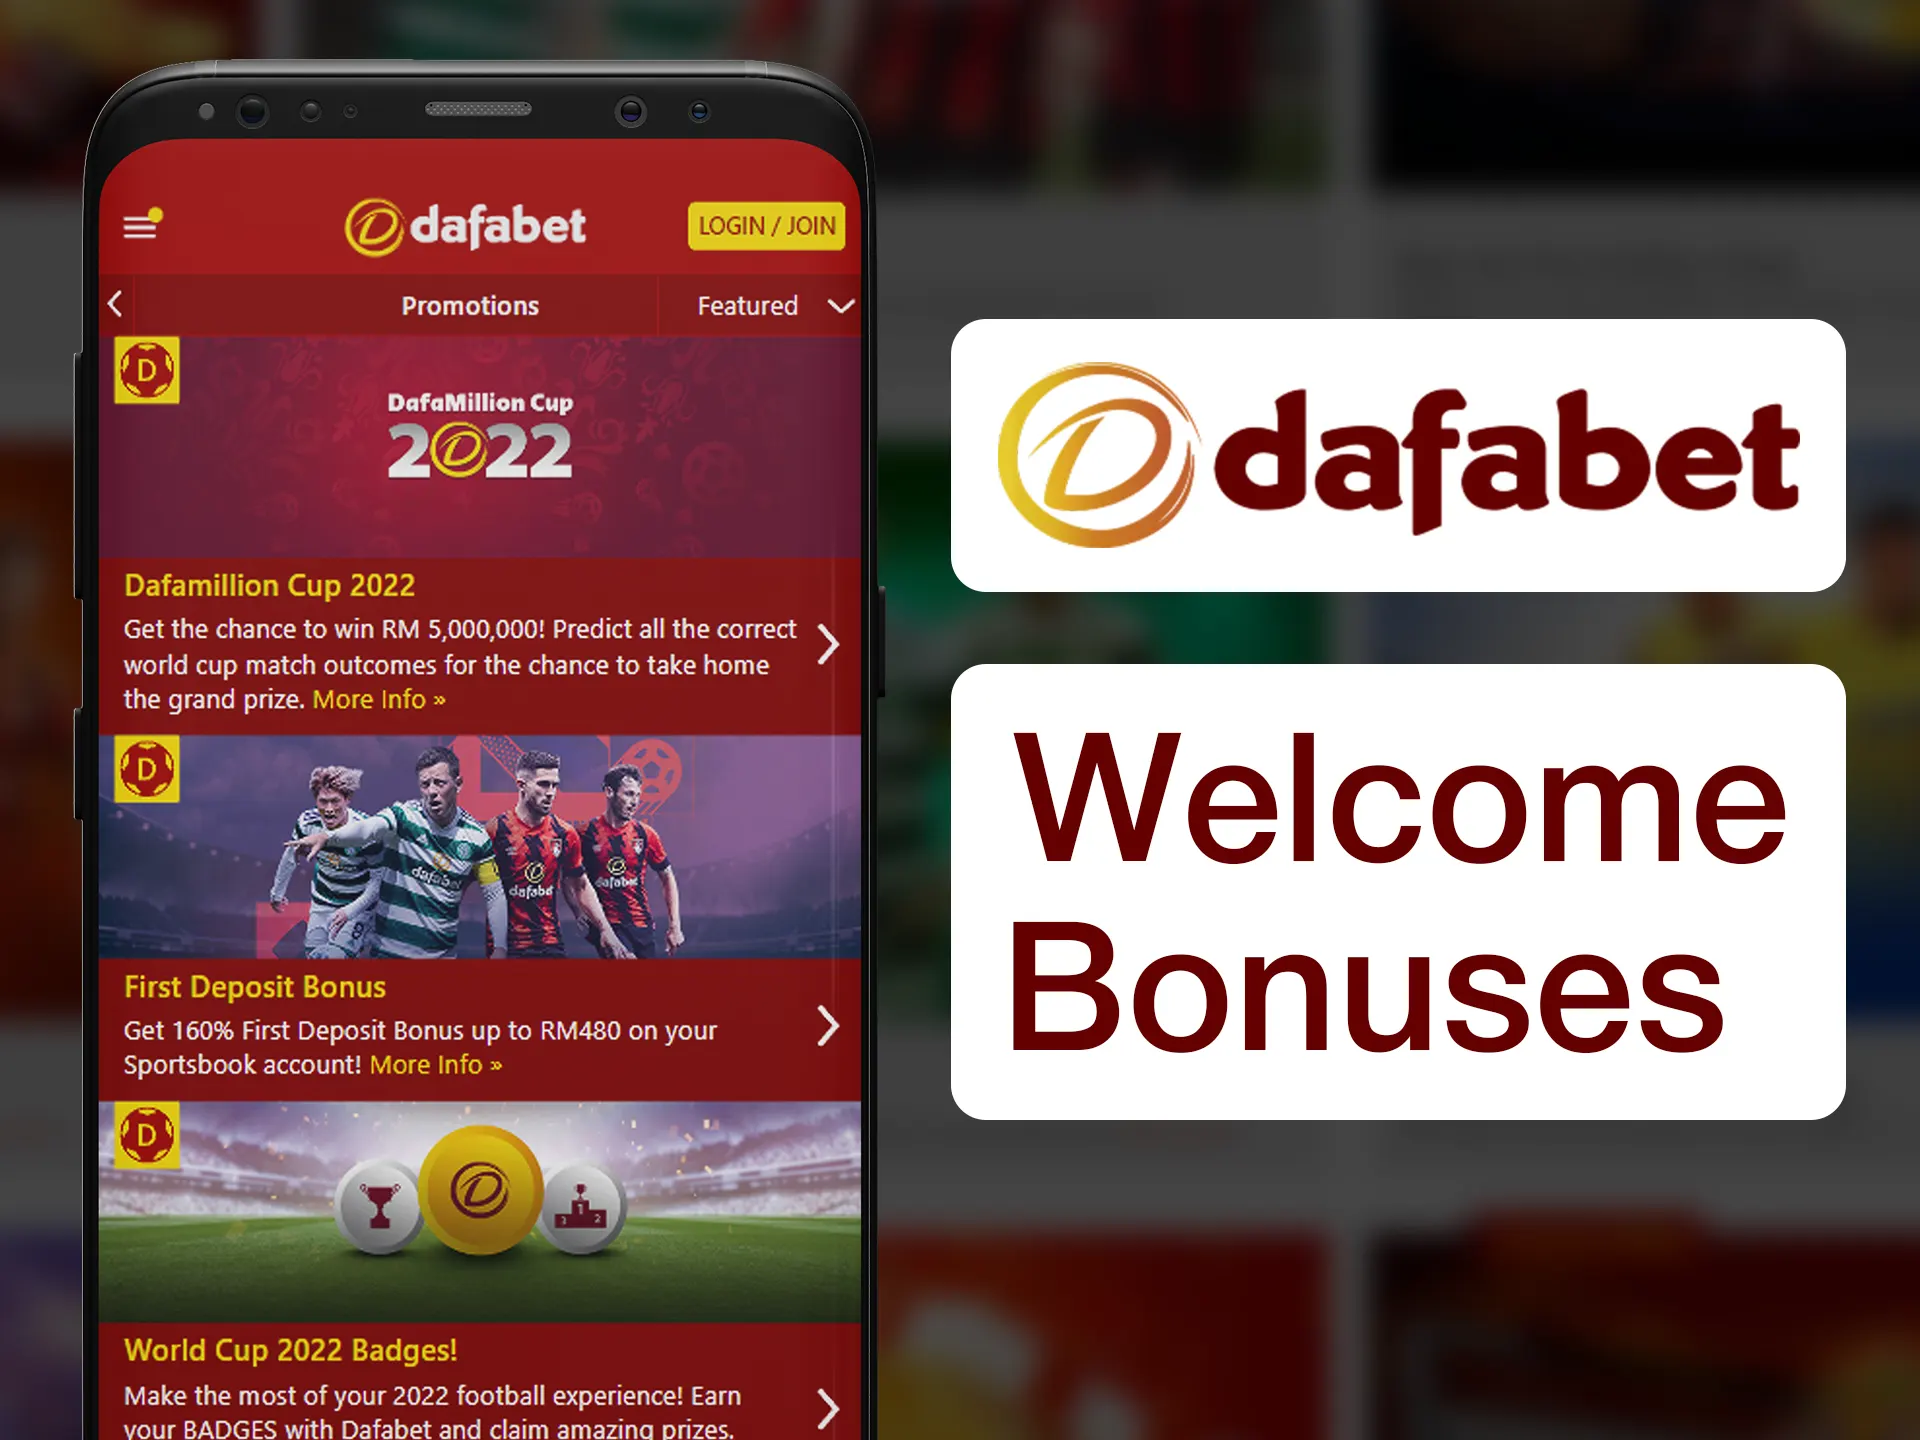 Don't forget to claim Dafabet welcome bonus.